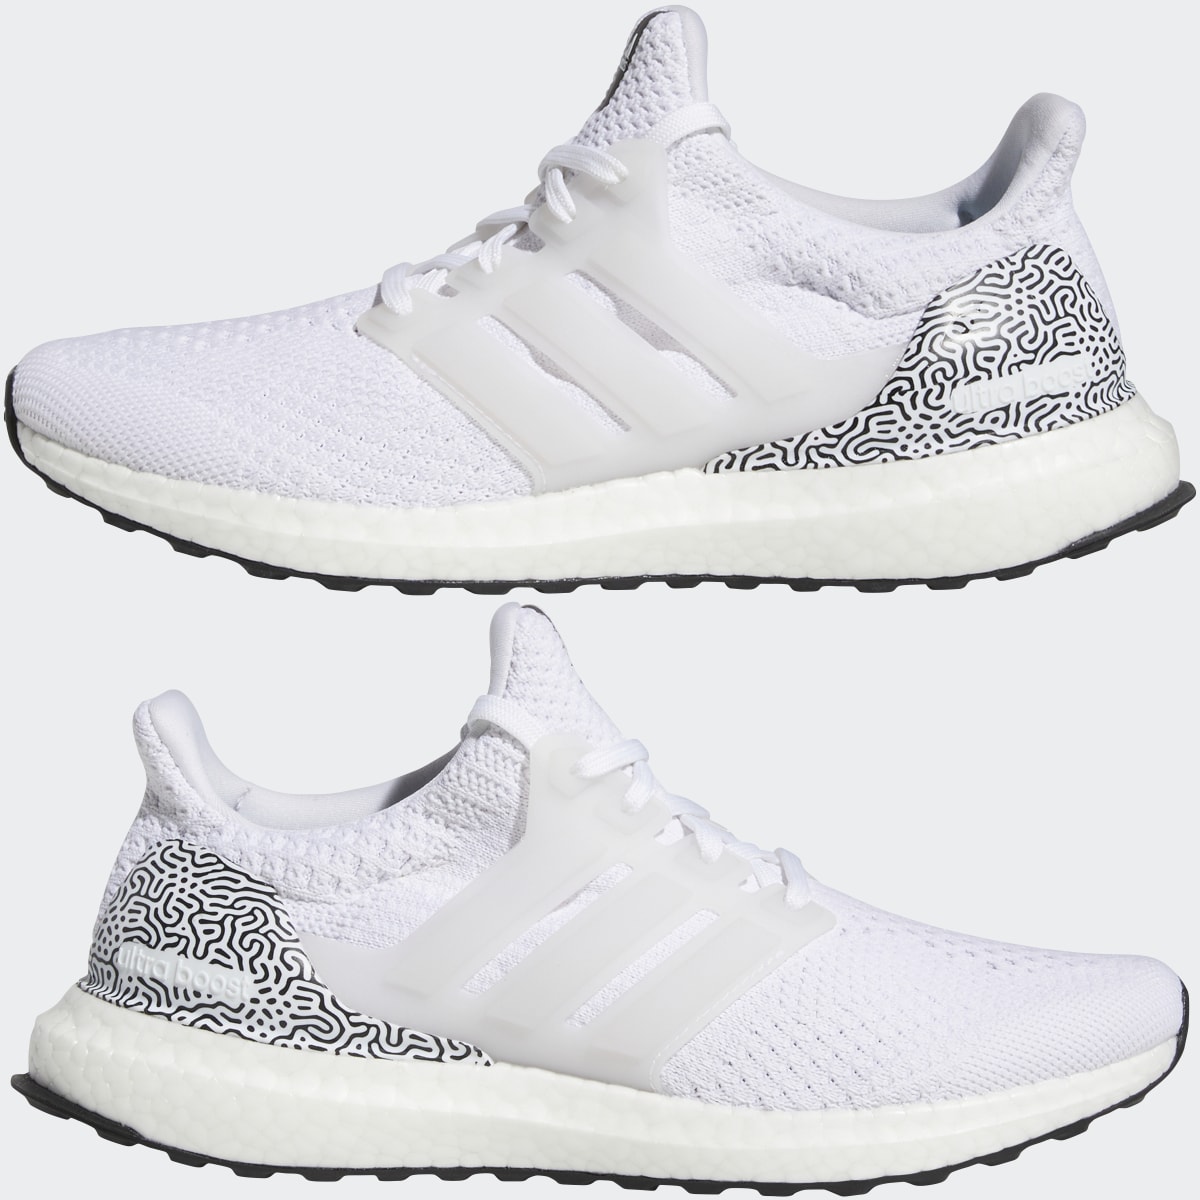 Adidas ULTRABOOST DNA SHOES. 11